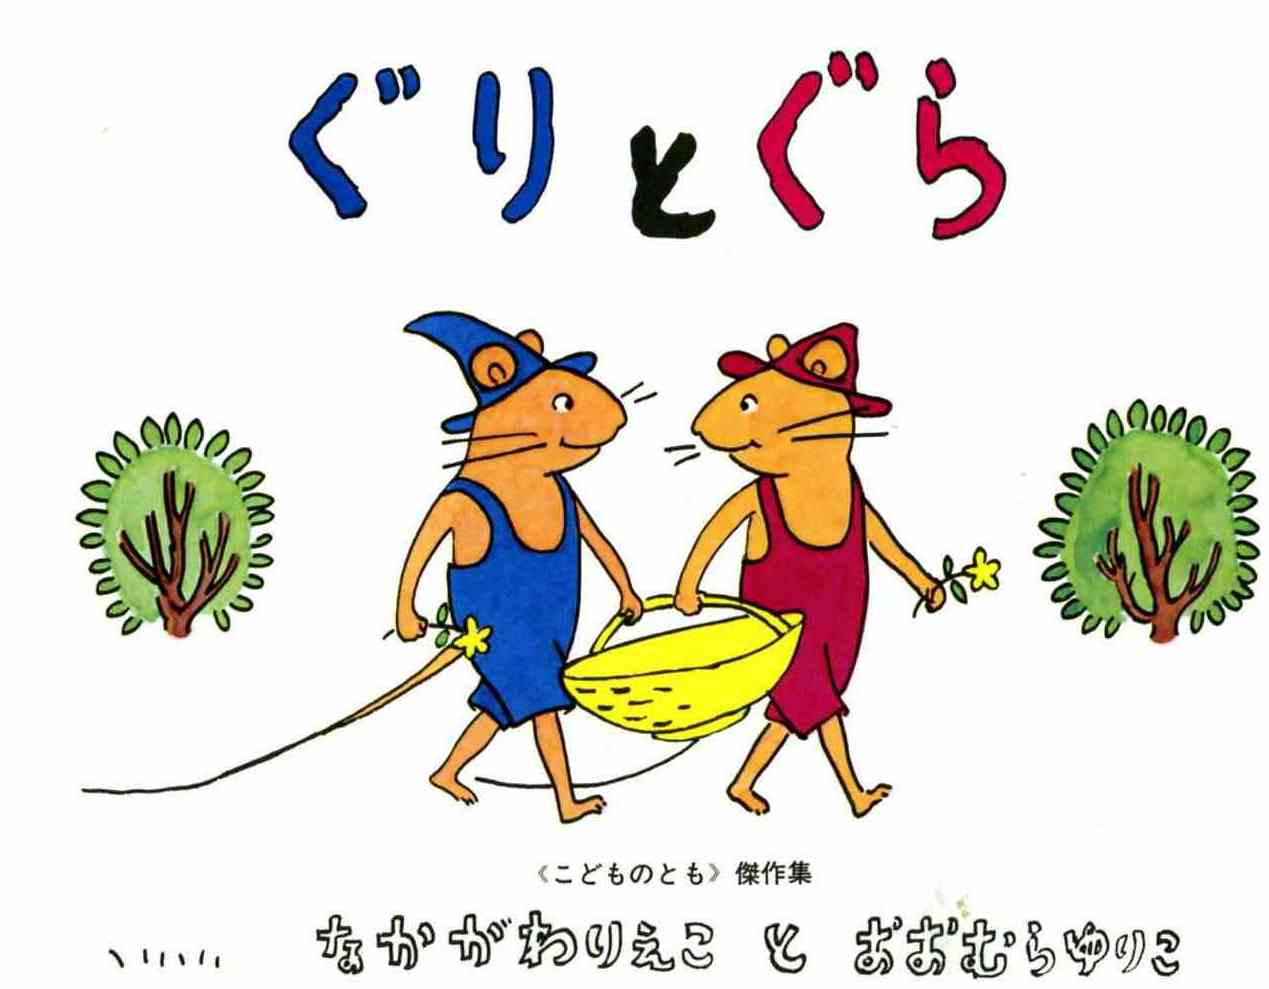 5 classic picture books to power up japanese